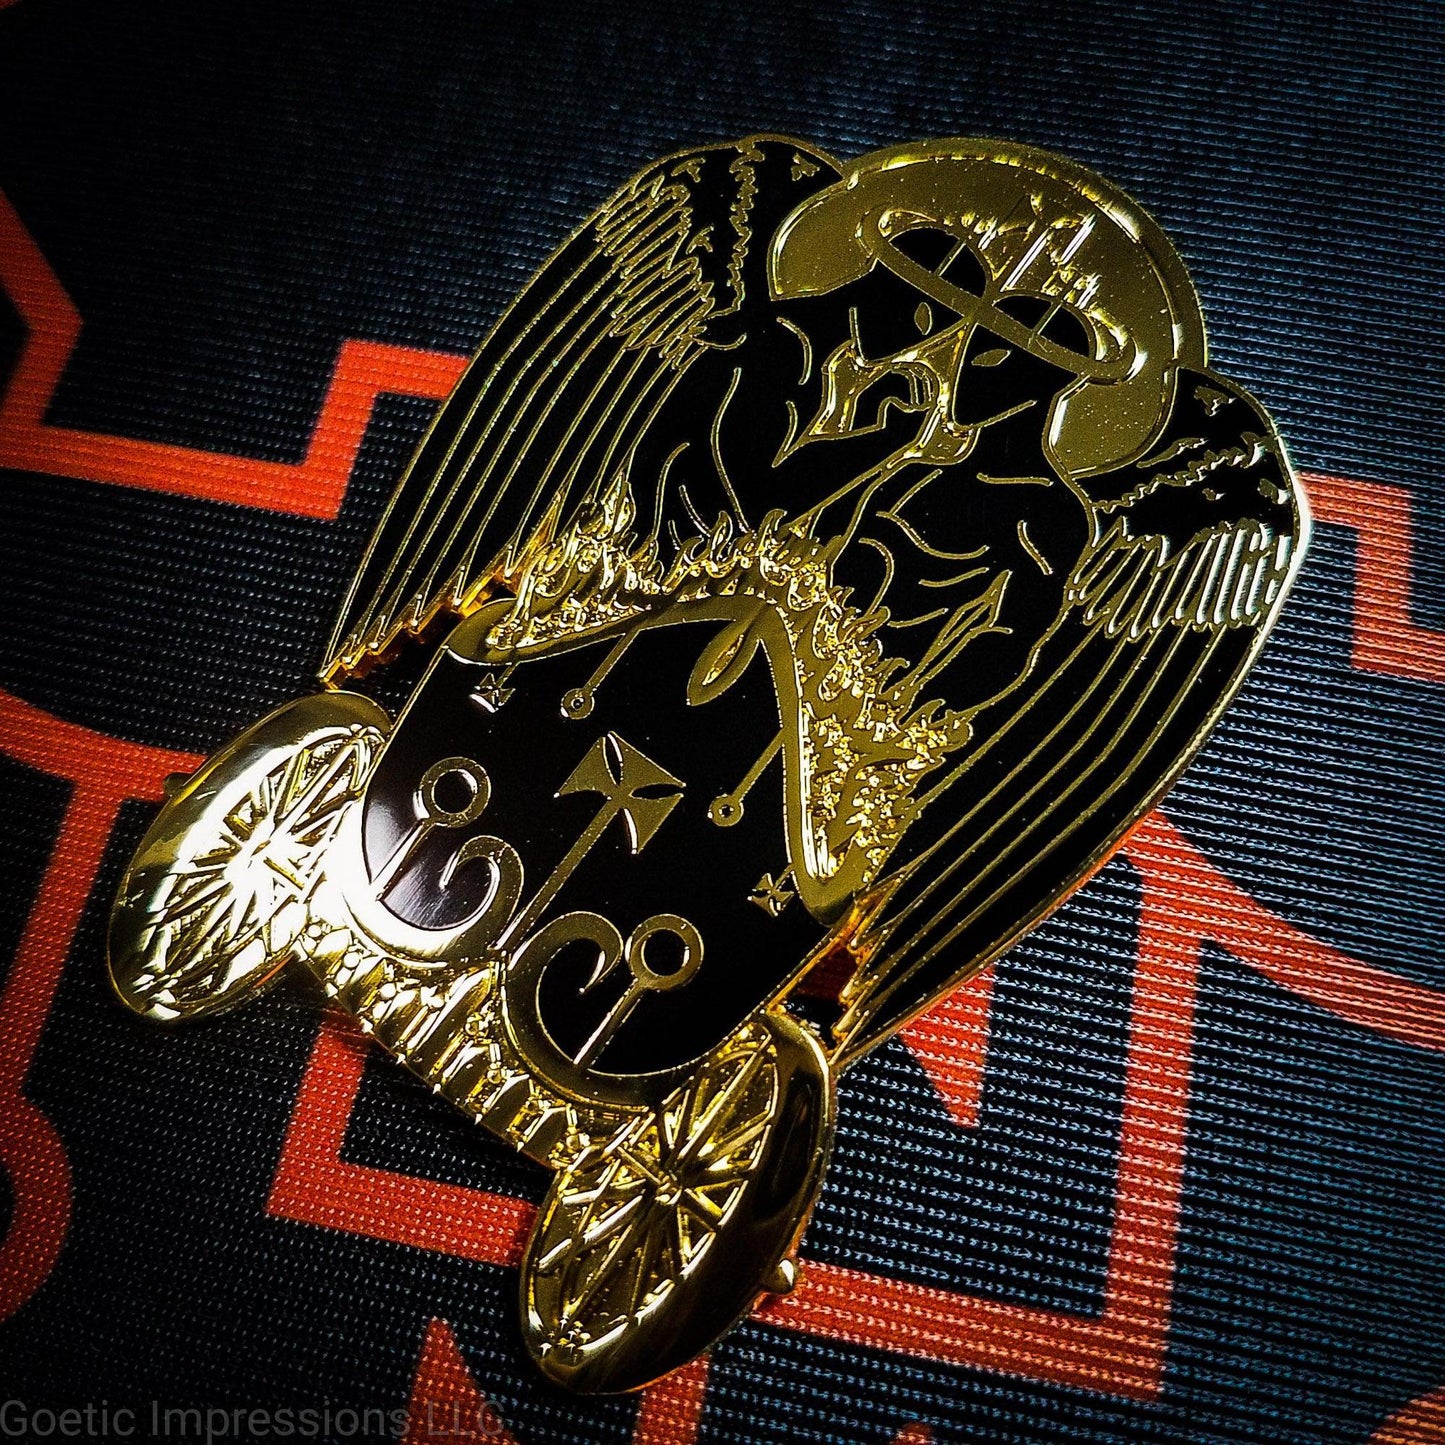 Black and gold hard enamel pin featuring the demon Belial. Belial is shown as two angels facing each other with arms interlocked.  They are standing in a flaming chariot.  The pin is on a black and orange Belial sigil altar cloth. 